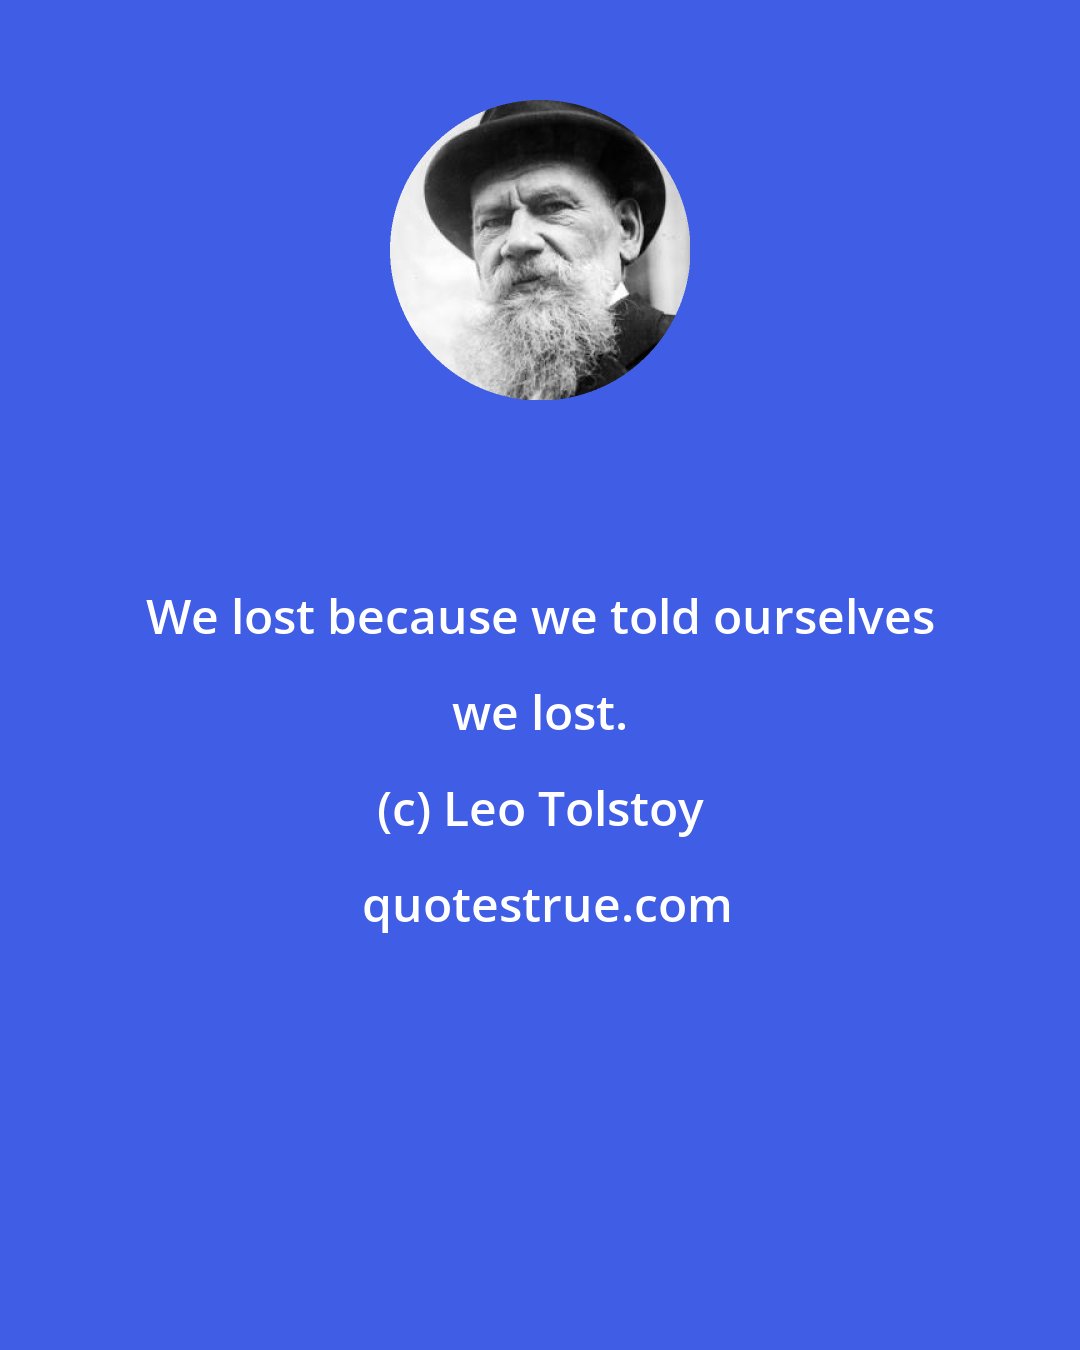 Leo Tolstoy: We lost because we told ourselves we lost.